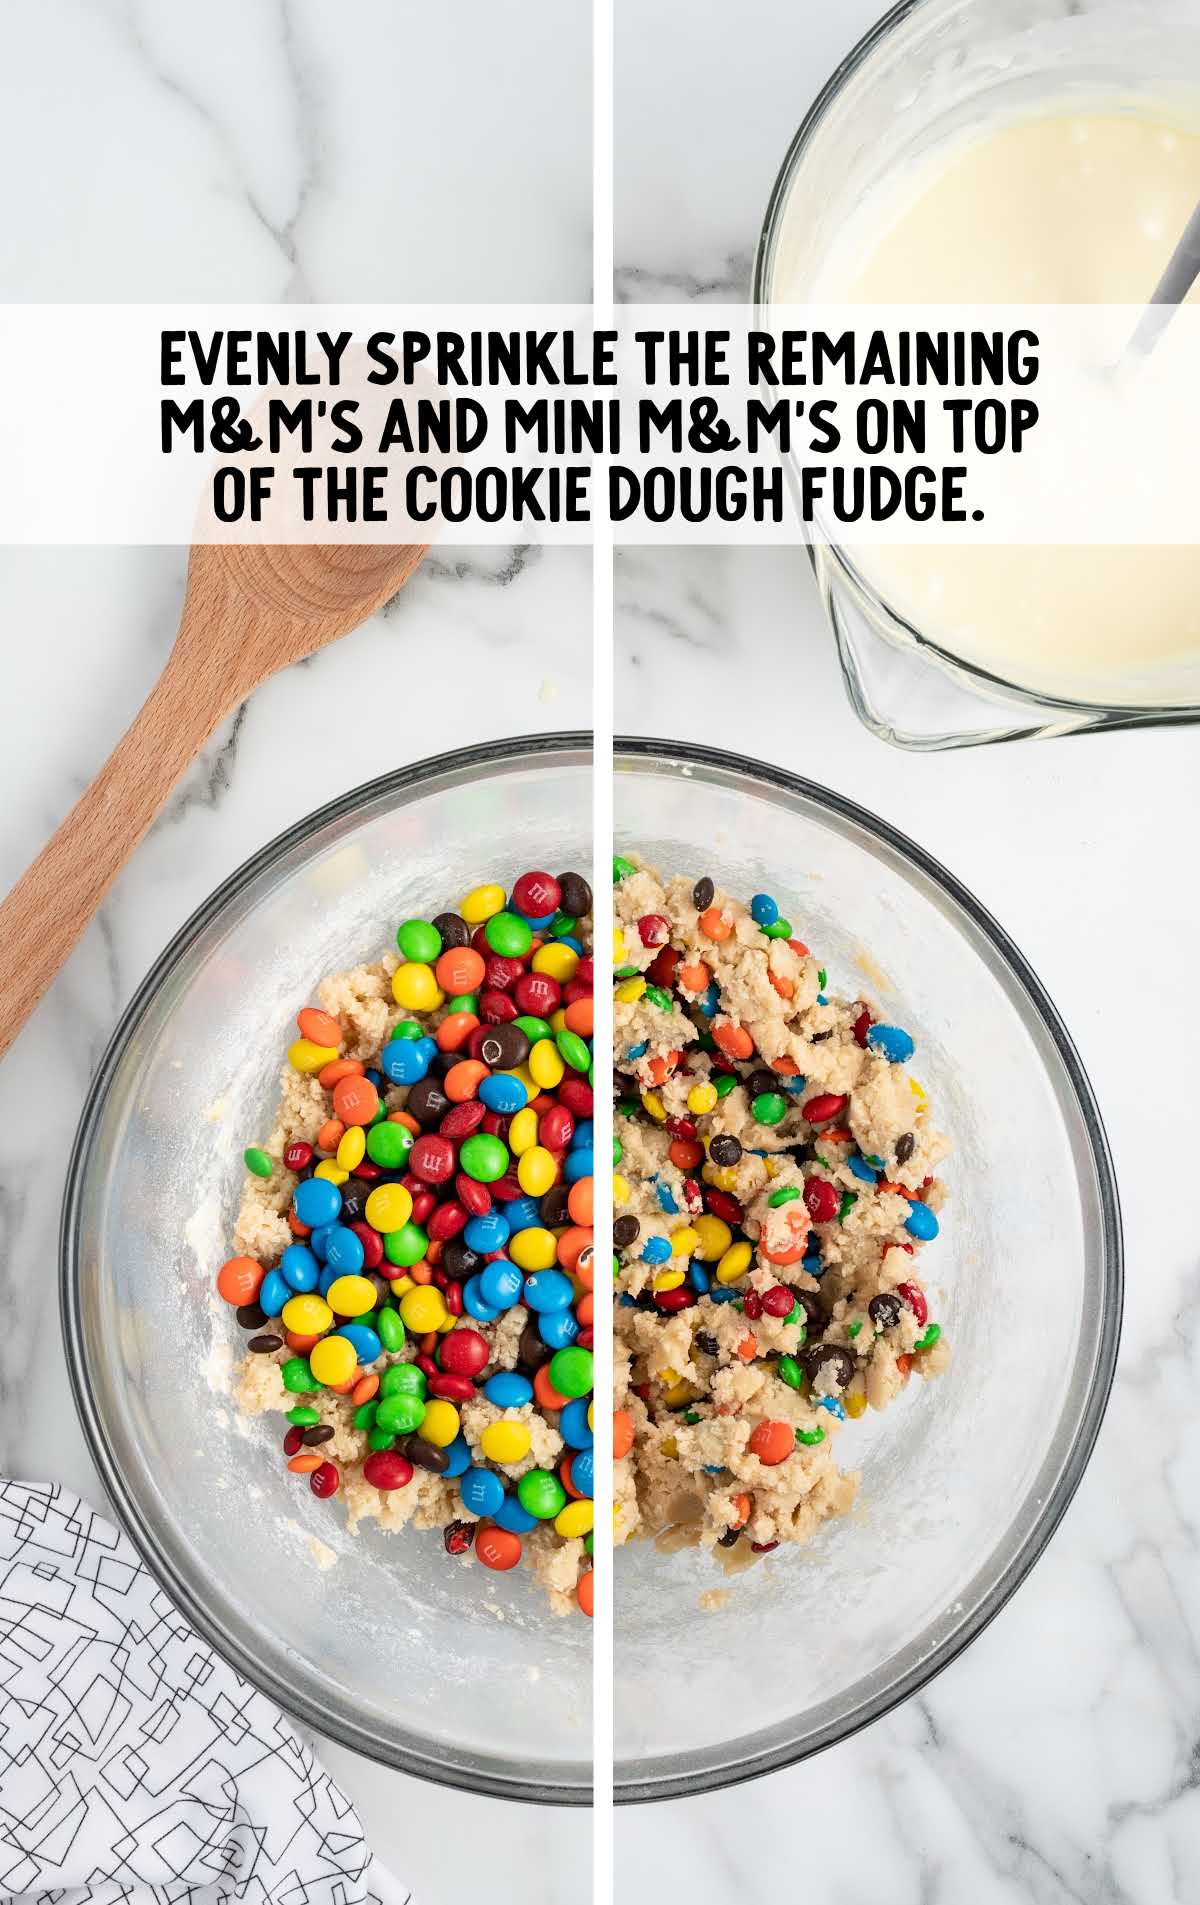 m&ms sprinkled on top of the cookie dough fudge in a bowl